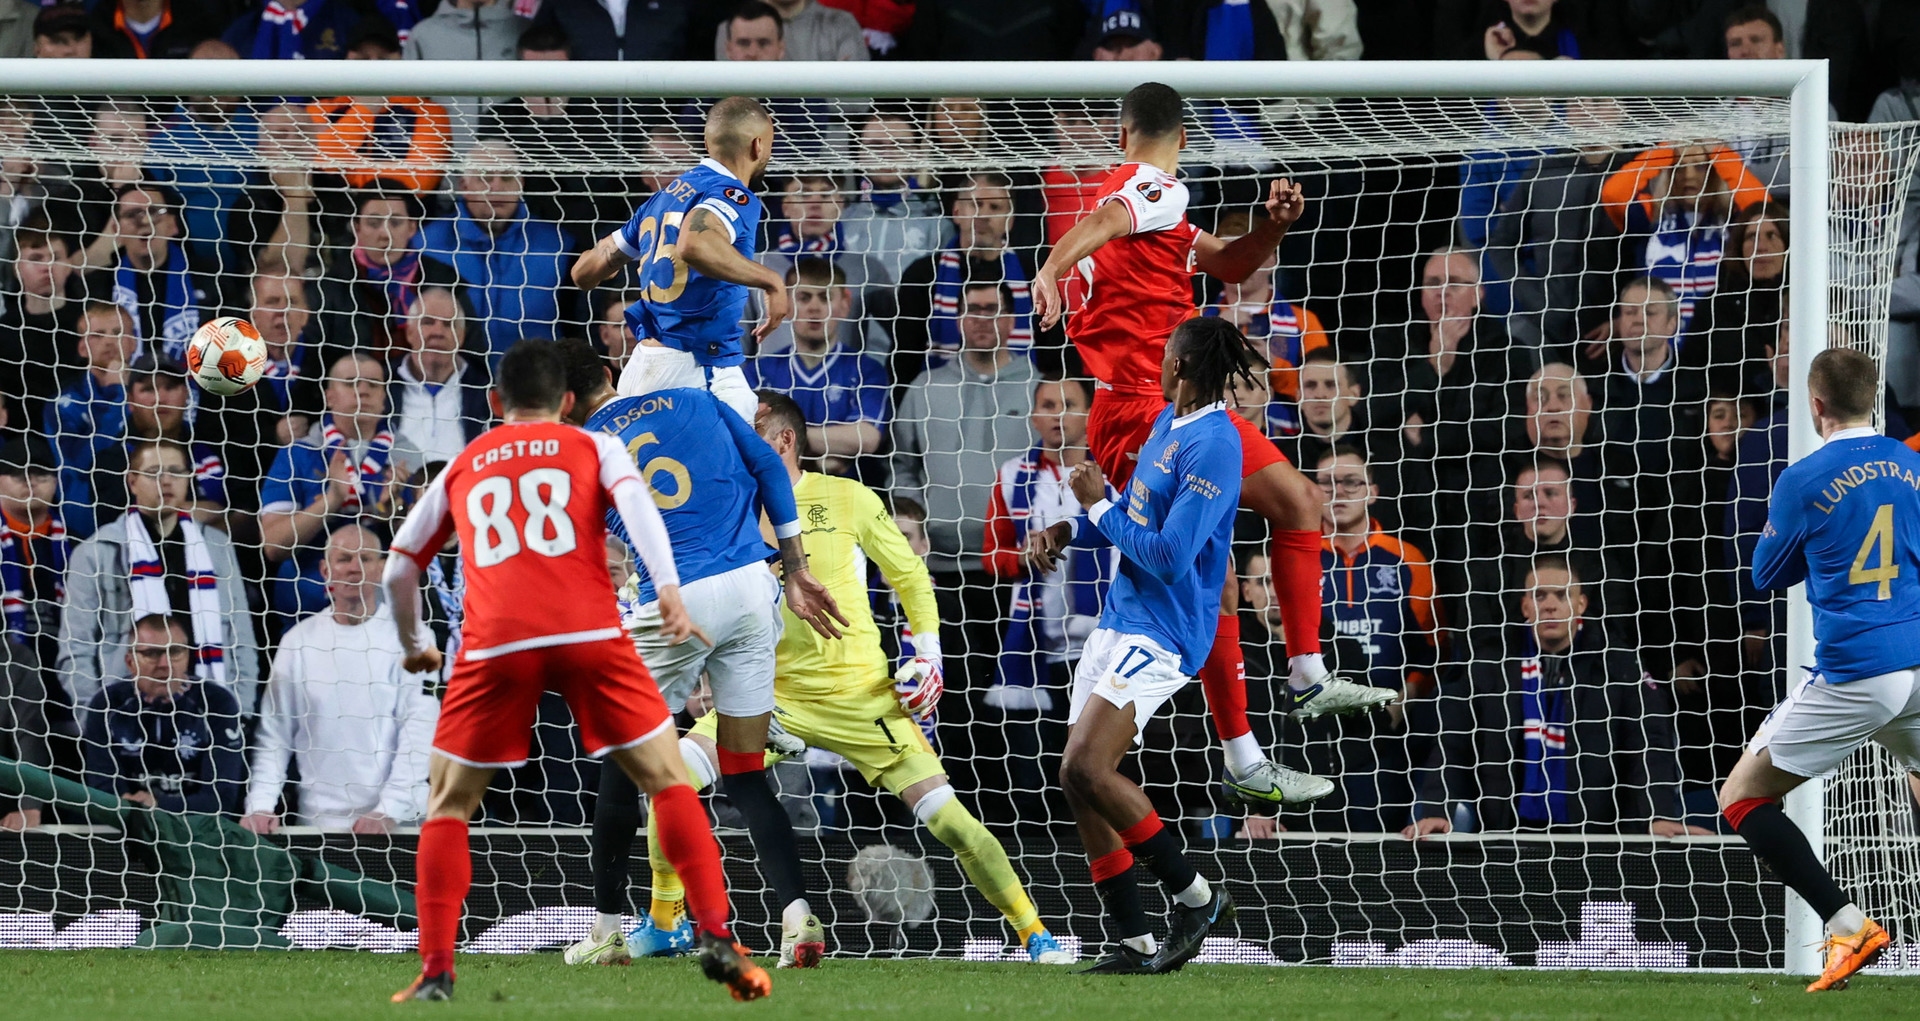 GLASGOW, SCOTLAND - APRIL 14: Braga's David Carmo heads home to make it 2-1 during a UEFA Europa League Quarter Final 2nd Leg match between Rangers and SC Braga at Ibrox, on April 14, 2022, in Glasgow, Scotland.  (Photo by Alan Harvey / SNS Group)